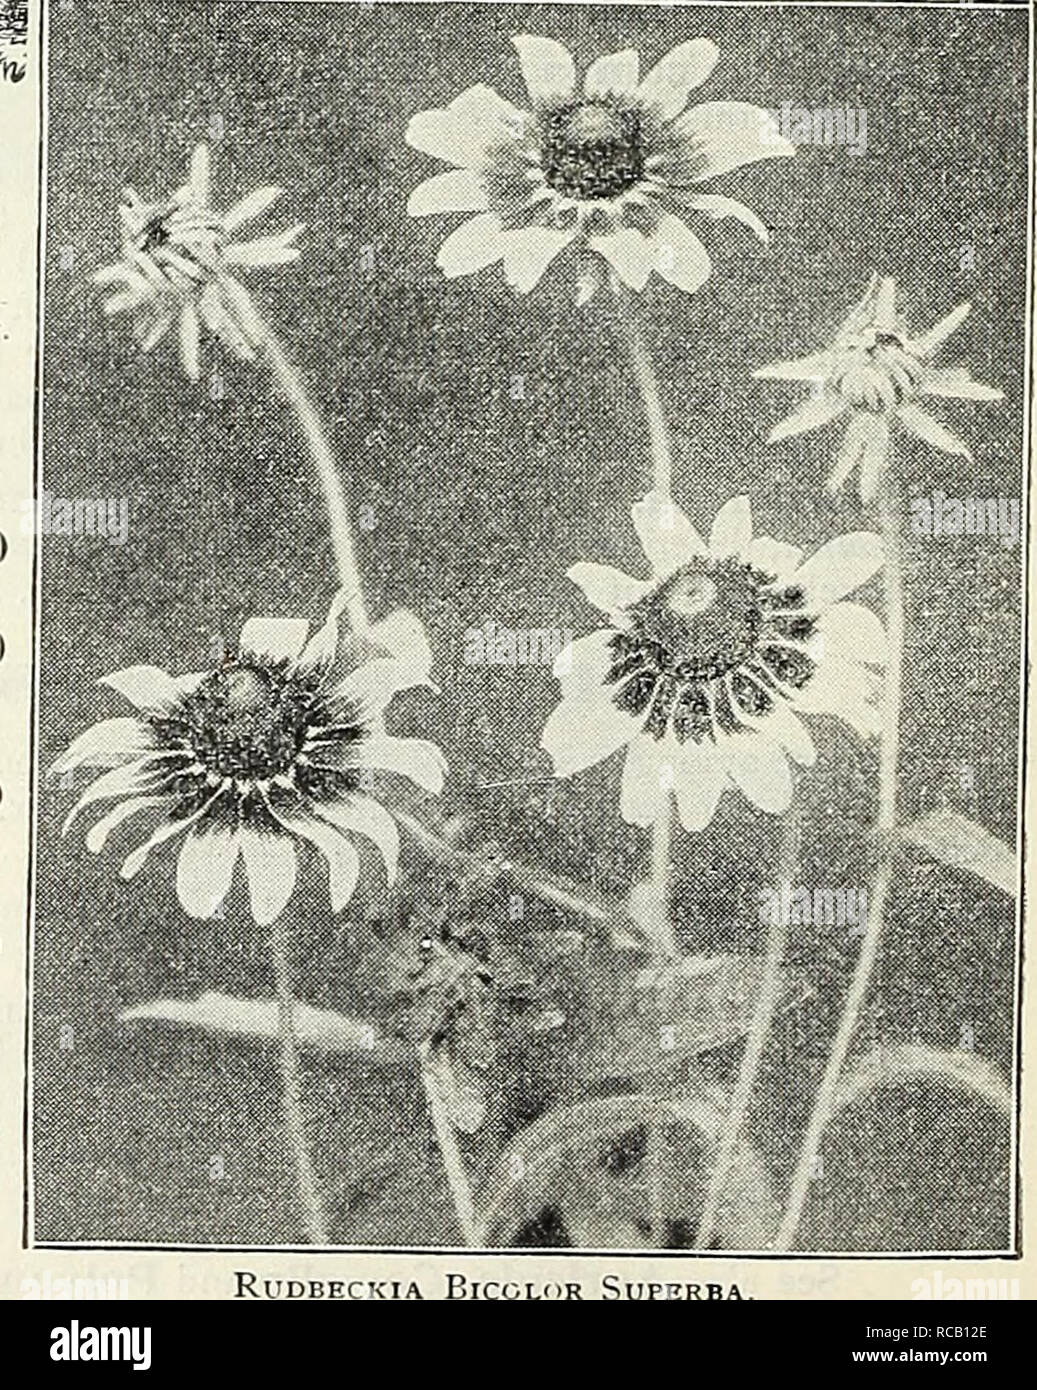 . Dreer's garden book : 1905. Seeds Catalogs; Nursery stock Catalogs; Gardening Equipment and supplies Catalogs; Flowers Seeds Catalogs; Vegetables Seeds Catalogs; Fruit Seeds Catalogs. 15 RUDBECKIA Cone-flower). 1(1 3901 BiCOlor Superba. Fine free-flowering annual variety, giowmg ab ut ^feethigh, loiminga dense bush and producing in gieat abundance on ong stems us bright flowers. The disc is brown, the flo.ets golden- yellow with large velvety-brown spots at the base; very effectne and useful for cutting. (See cut.) 3904 Bicolor superba semiplena. Semi-double flowering form of the above, equa Stock Photo